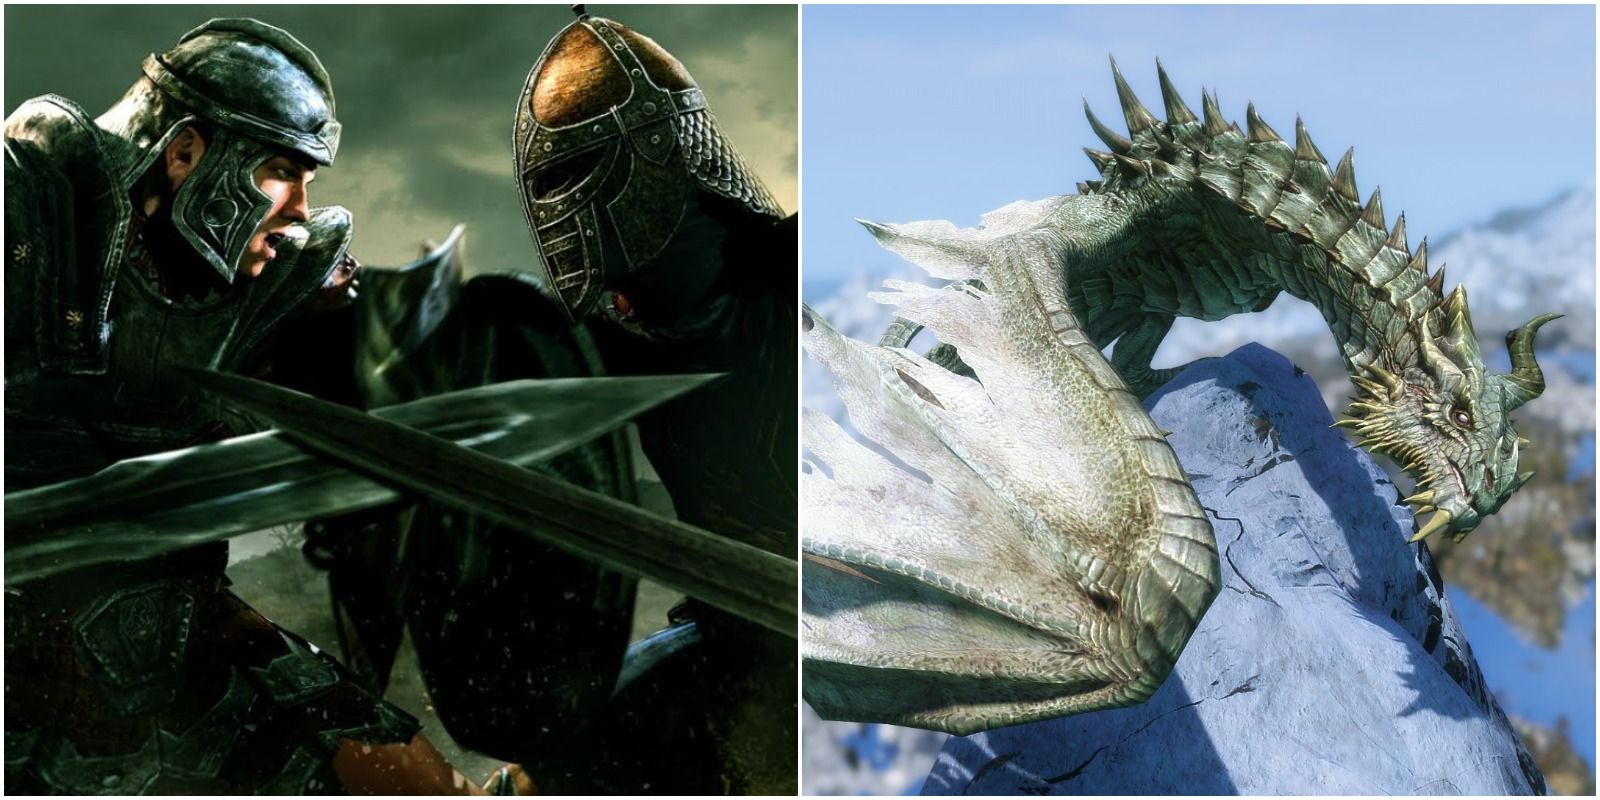 left: imperial and stormcloak soldiers fighting. right: paarthurnax the dragon on mountain